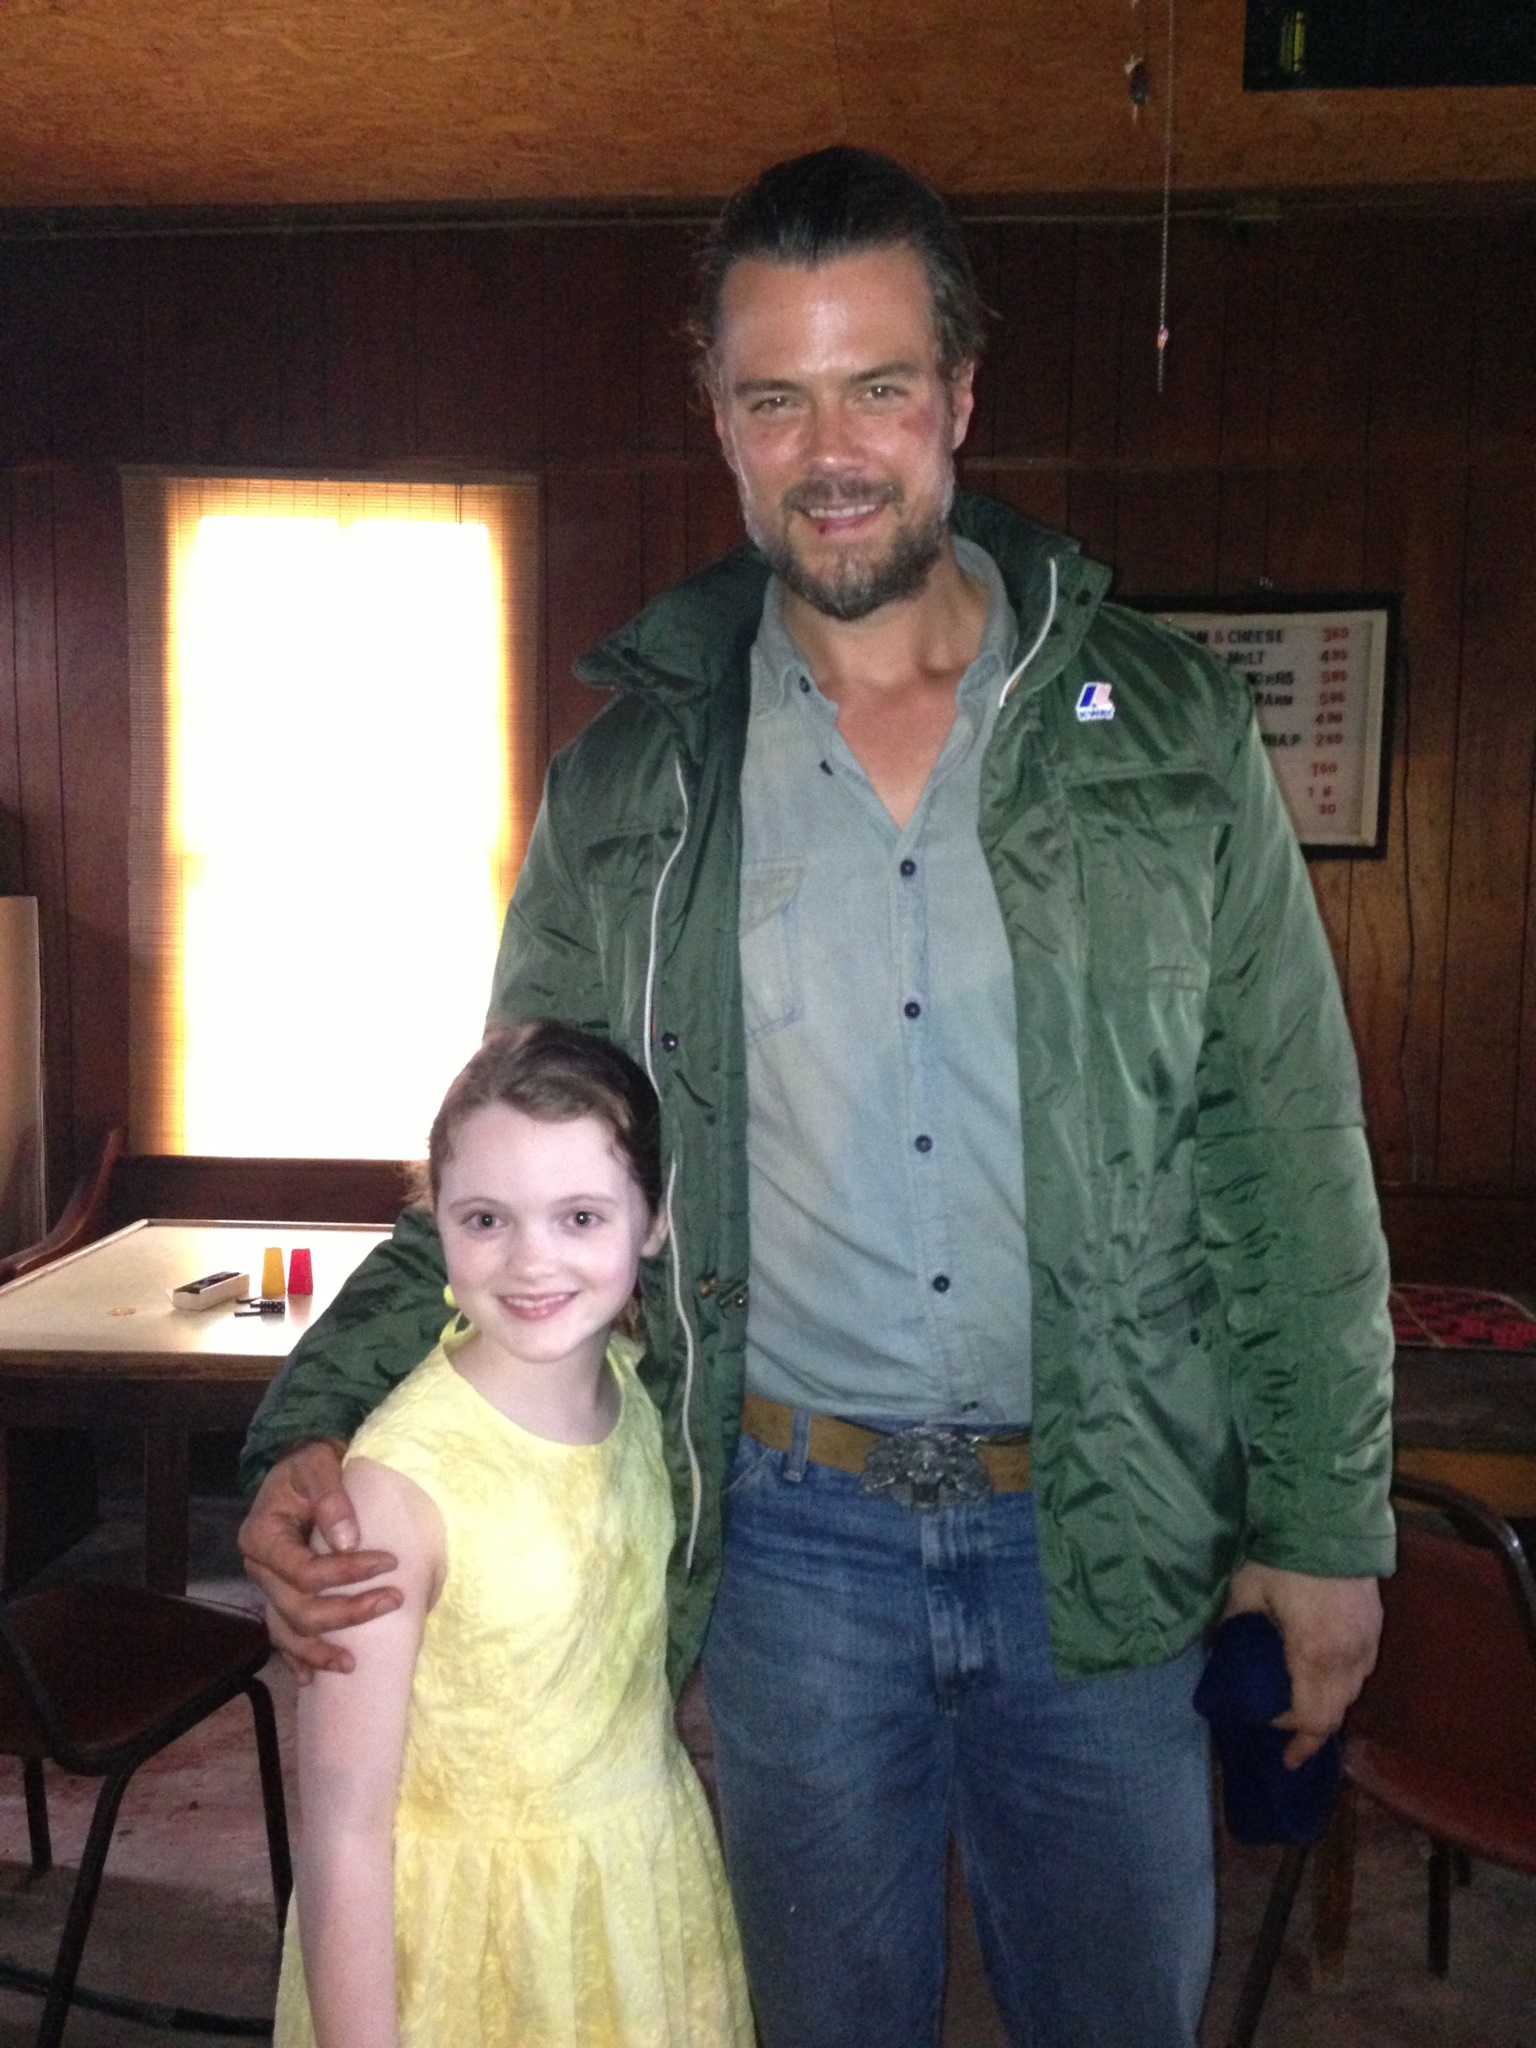 Teagan and Josh Duhamel on set of 'Lost in the Sun'.